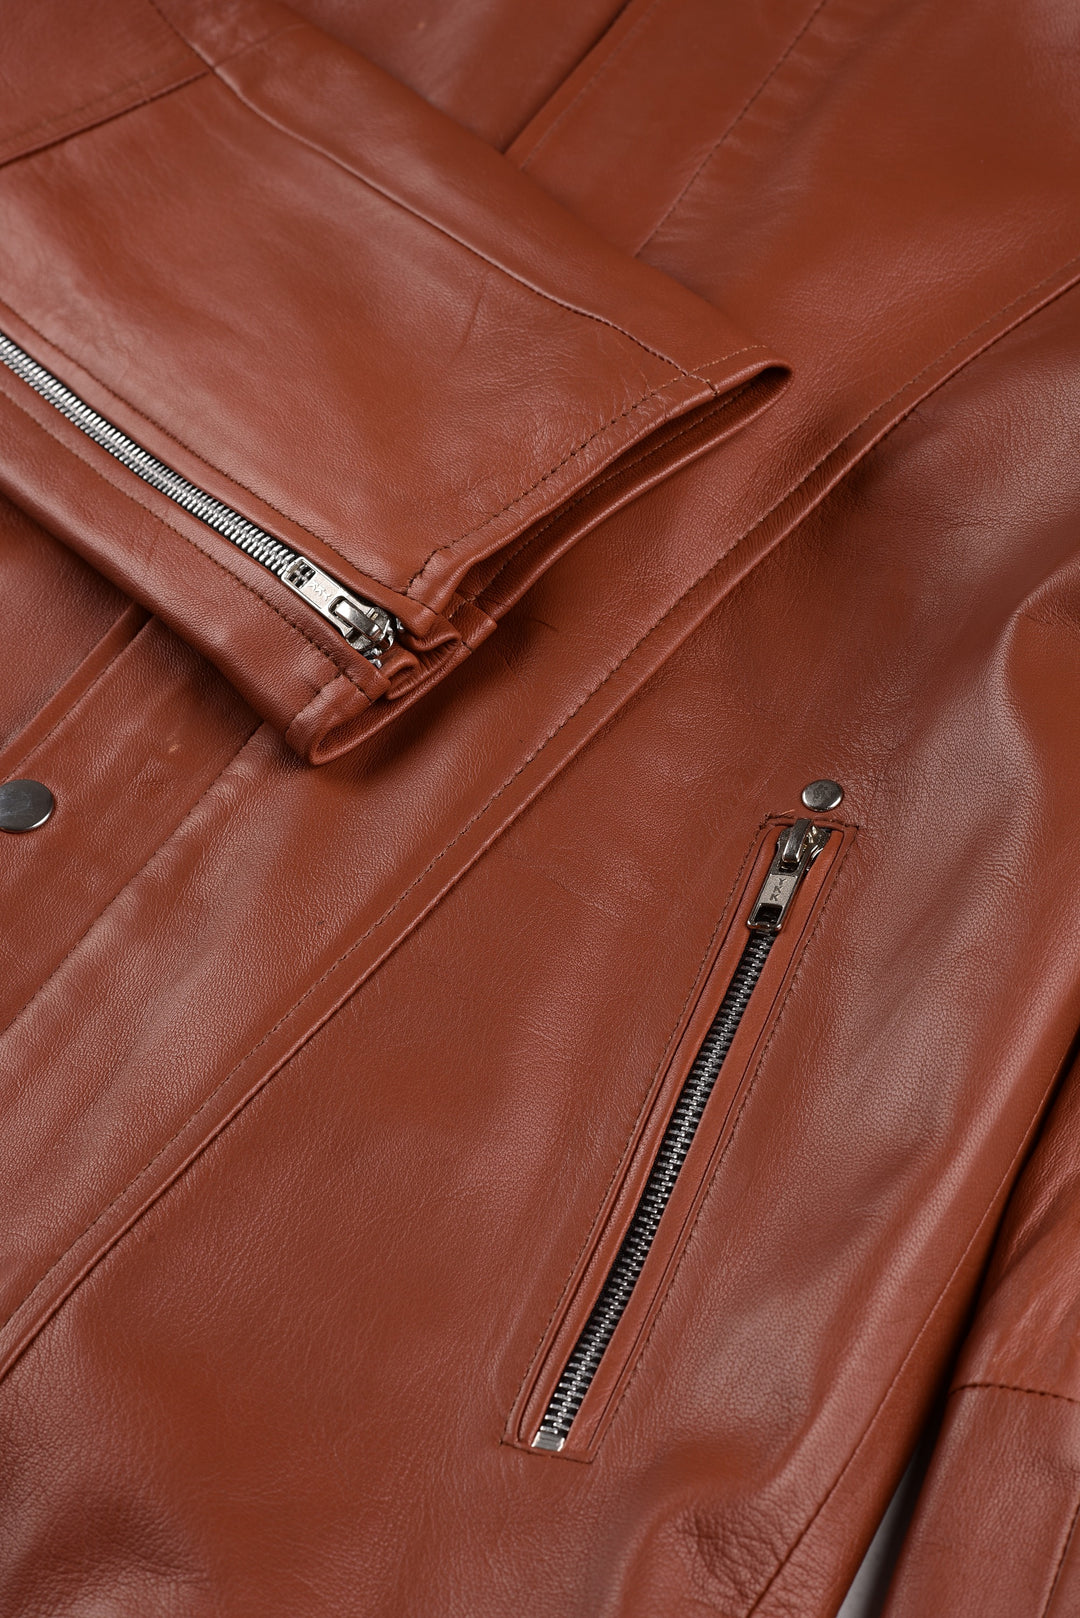 Brown bomber leather jacket